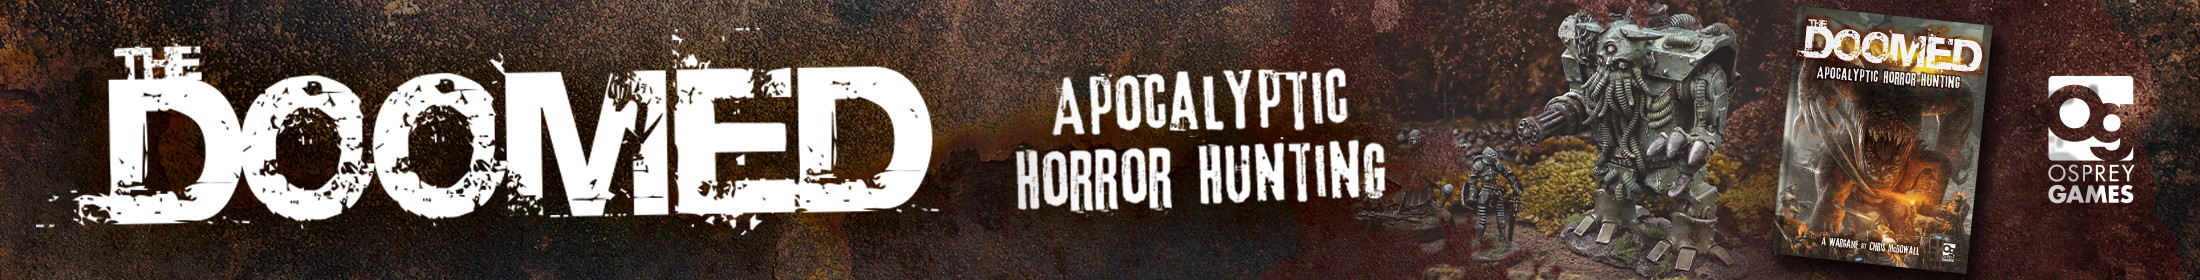 The Doomed: Apocalyptic Horror Hunting